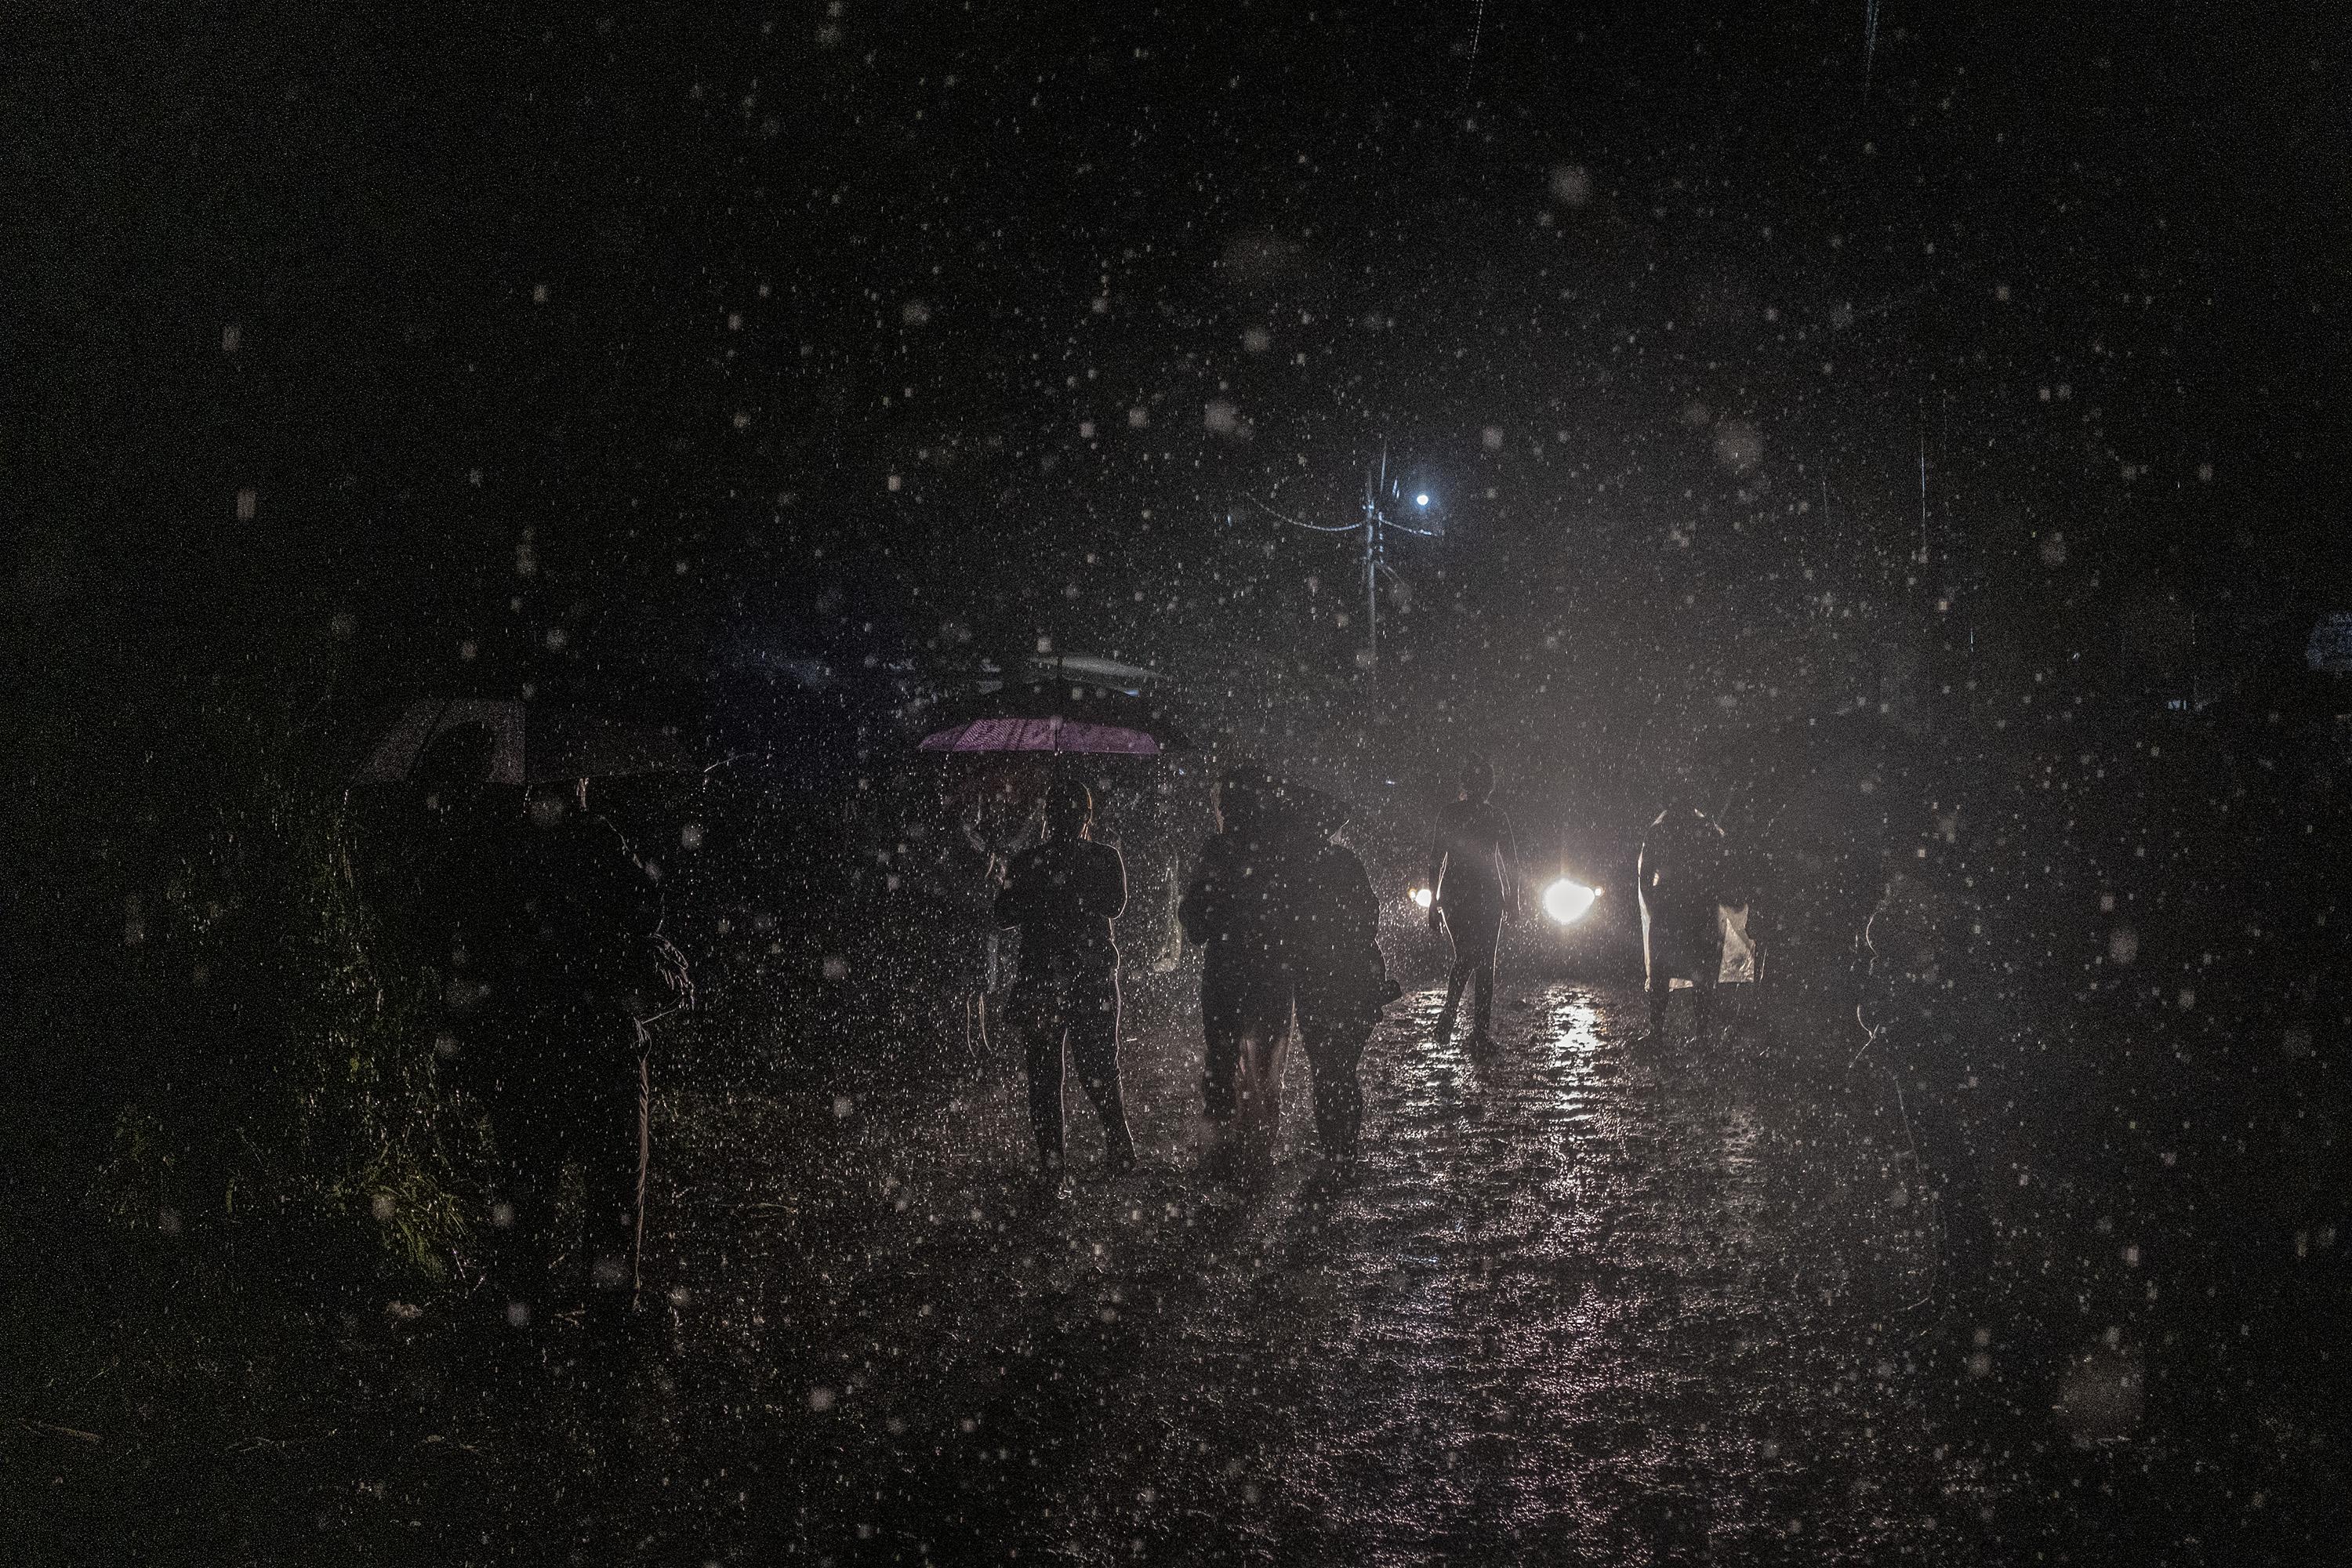 Rain poured down on Izalco, Sonsonate, on the night of April 27. Data from the Ministry of the Environment shows that the town in western El Salvador was among those that received the most precipitation in the country that day. Despite the weather, dozens of women, some of them pregnant or accompanied by children, arrived from departments including San Miguel, Usulután, and San Salvador to see if their family members would be released. Most come from families unable to pay for daily transportation and joined together in groups of ten to pay the $30 to escape the rain in a hotel room. Photo: Carlos Barrera/El Faro